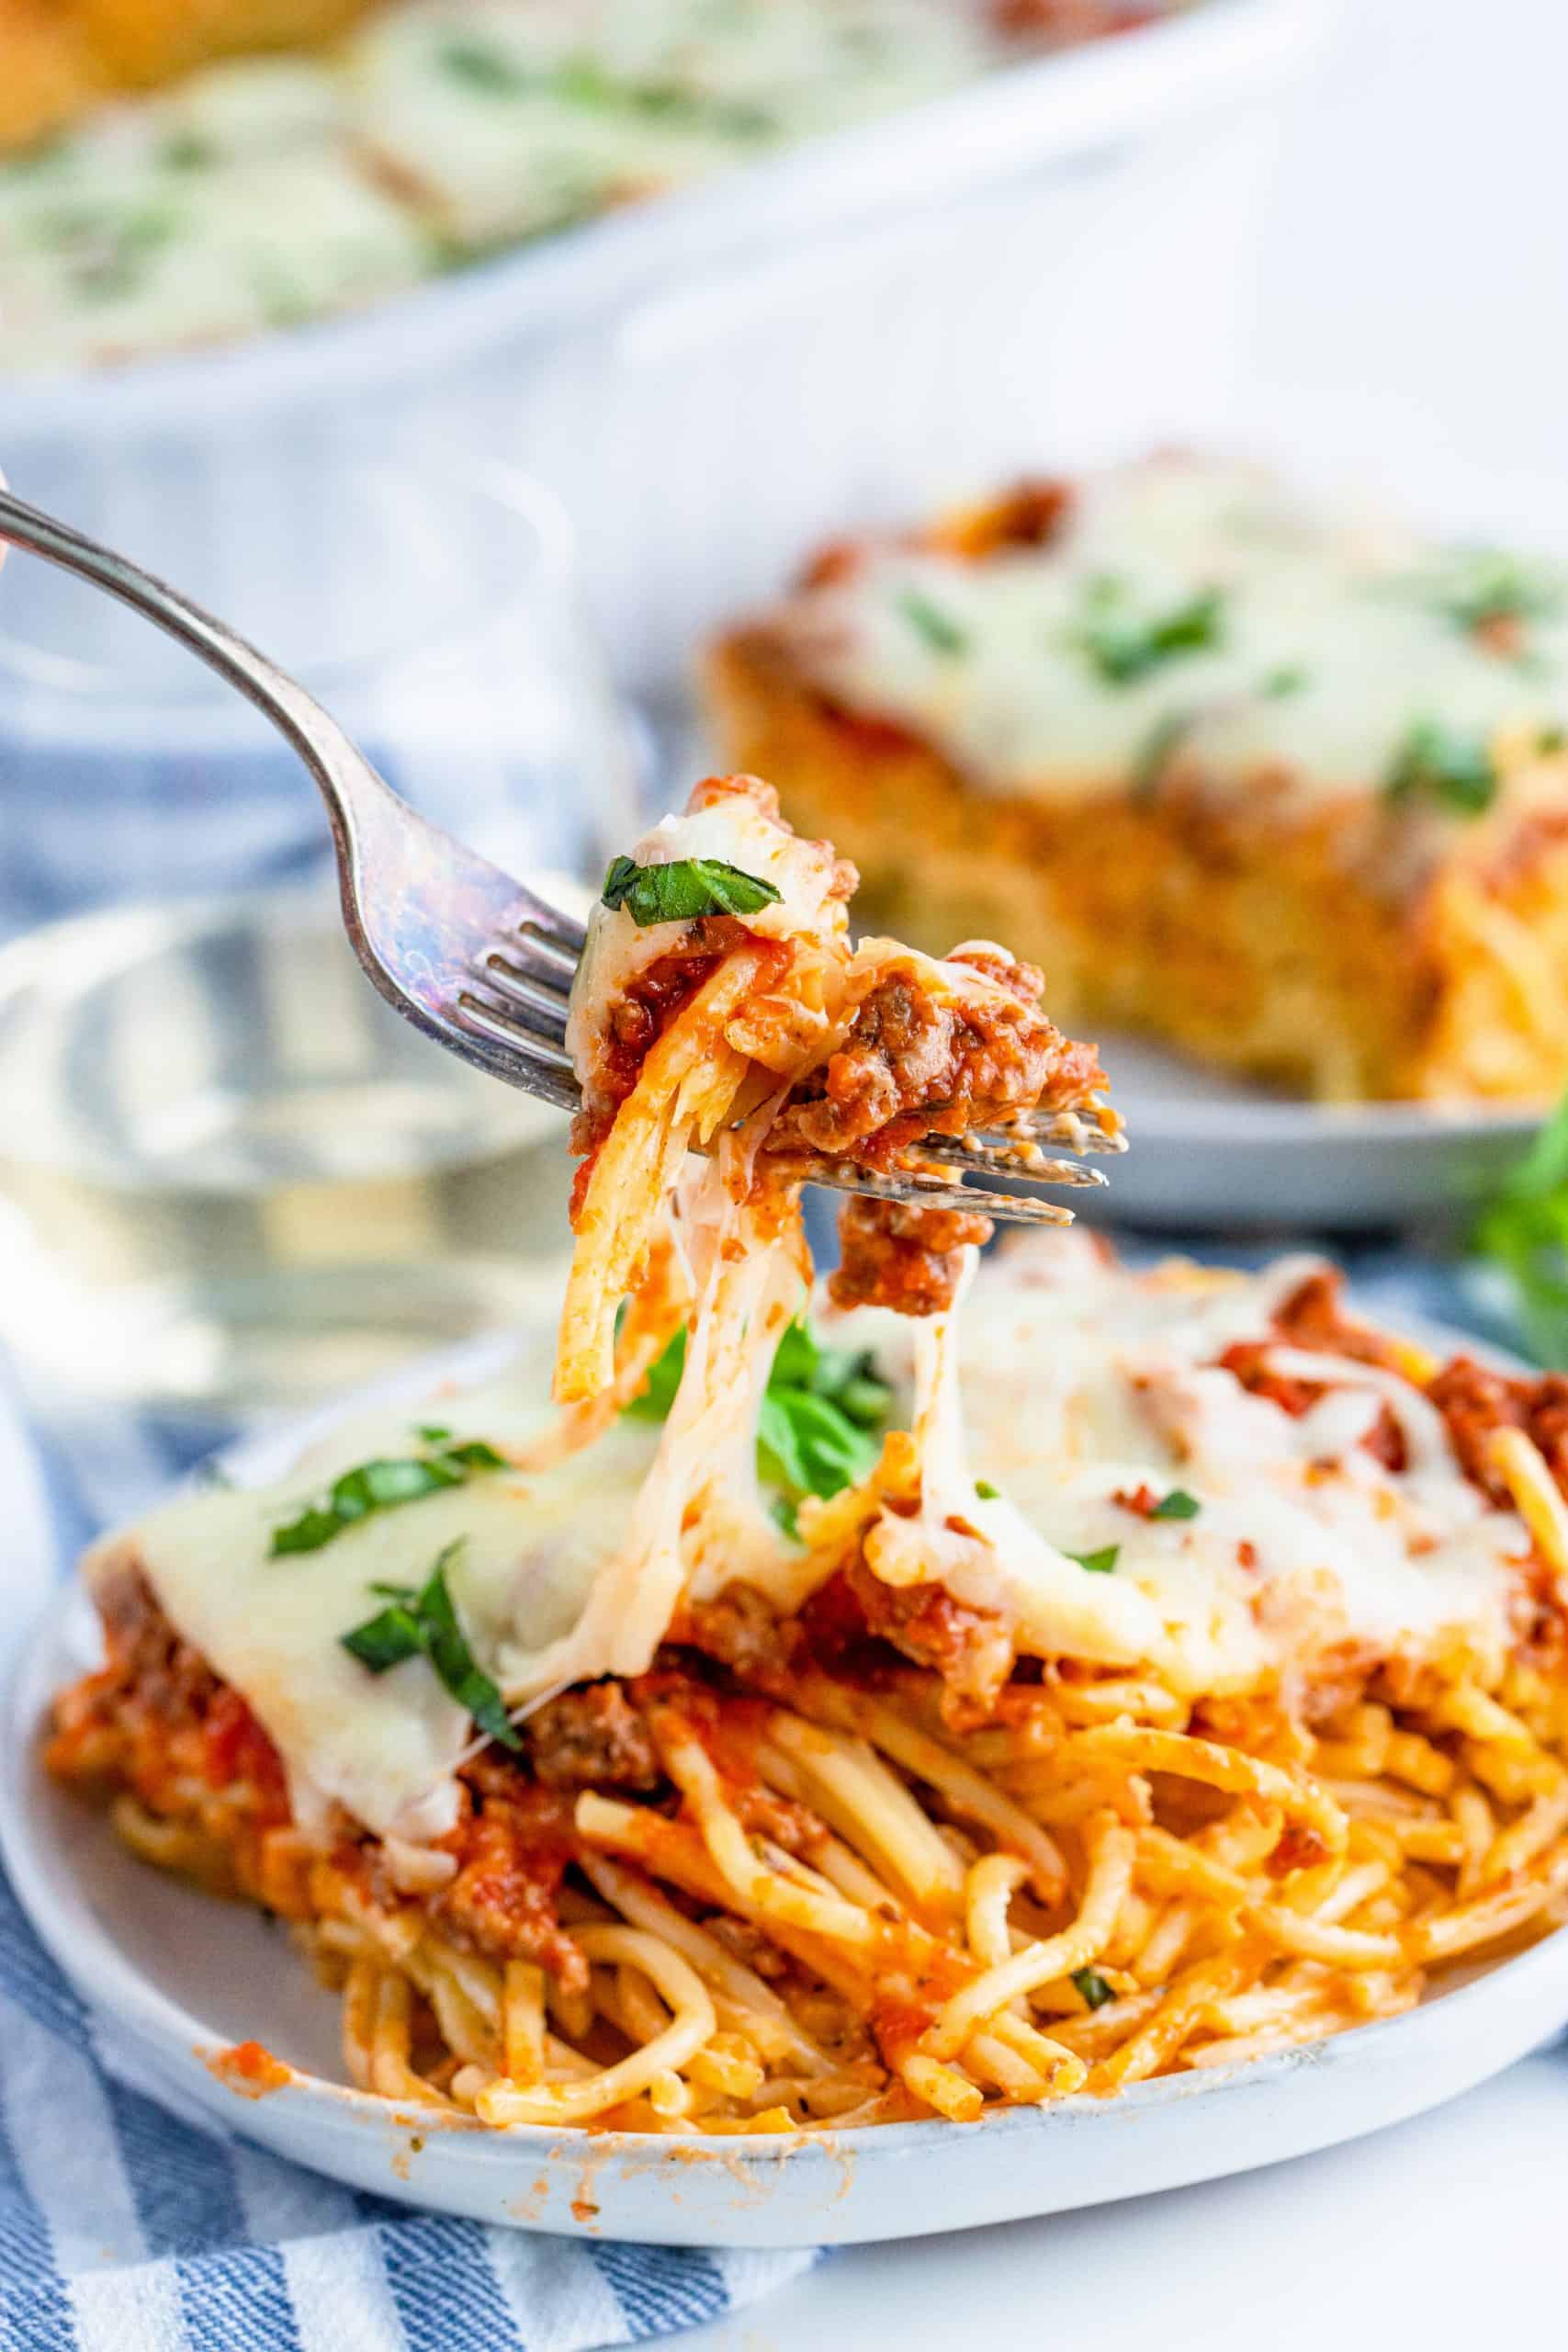 (last image) close up photo of fork pulling up a bite of Baked Spaghetti.